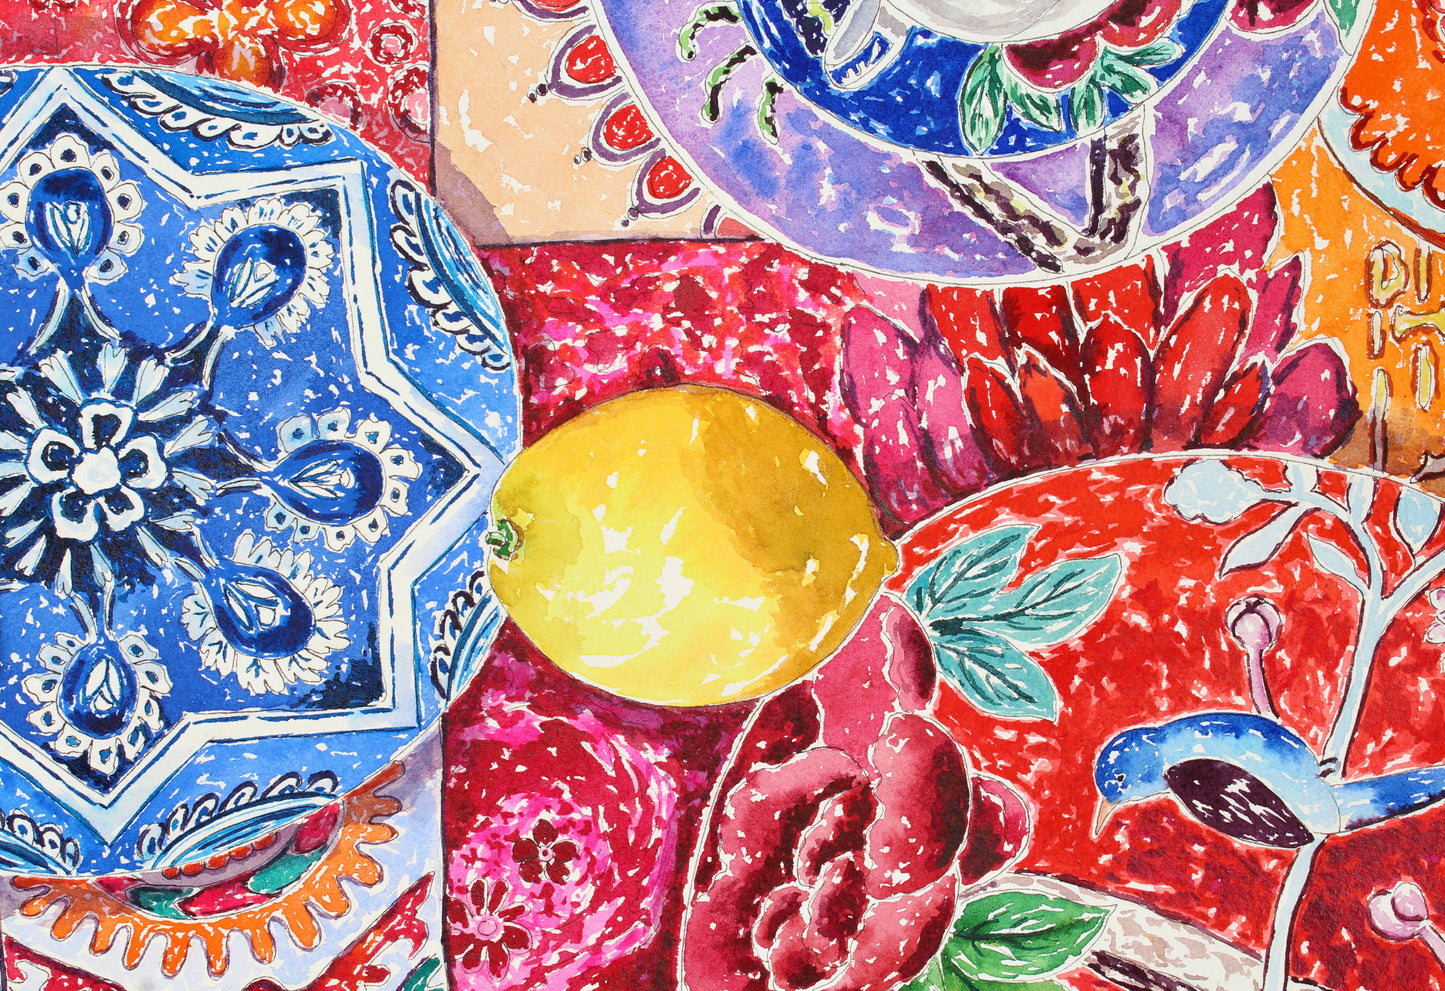 Brunch In Barcelona, An Original 22" x 30" Highly Detailed Watercolor And Ink Painting Of A Maximalist Table Setting